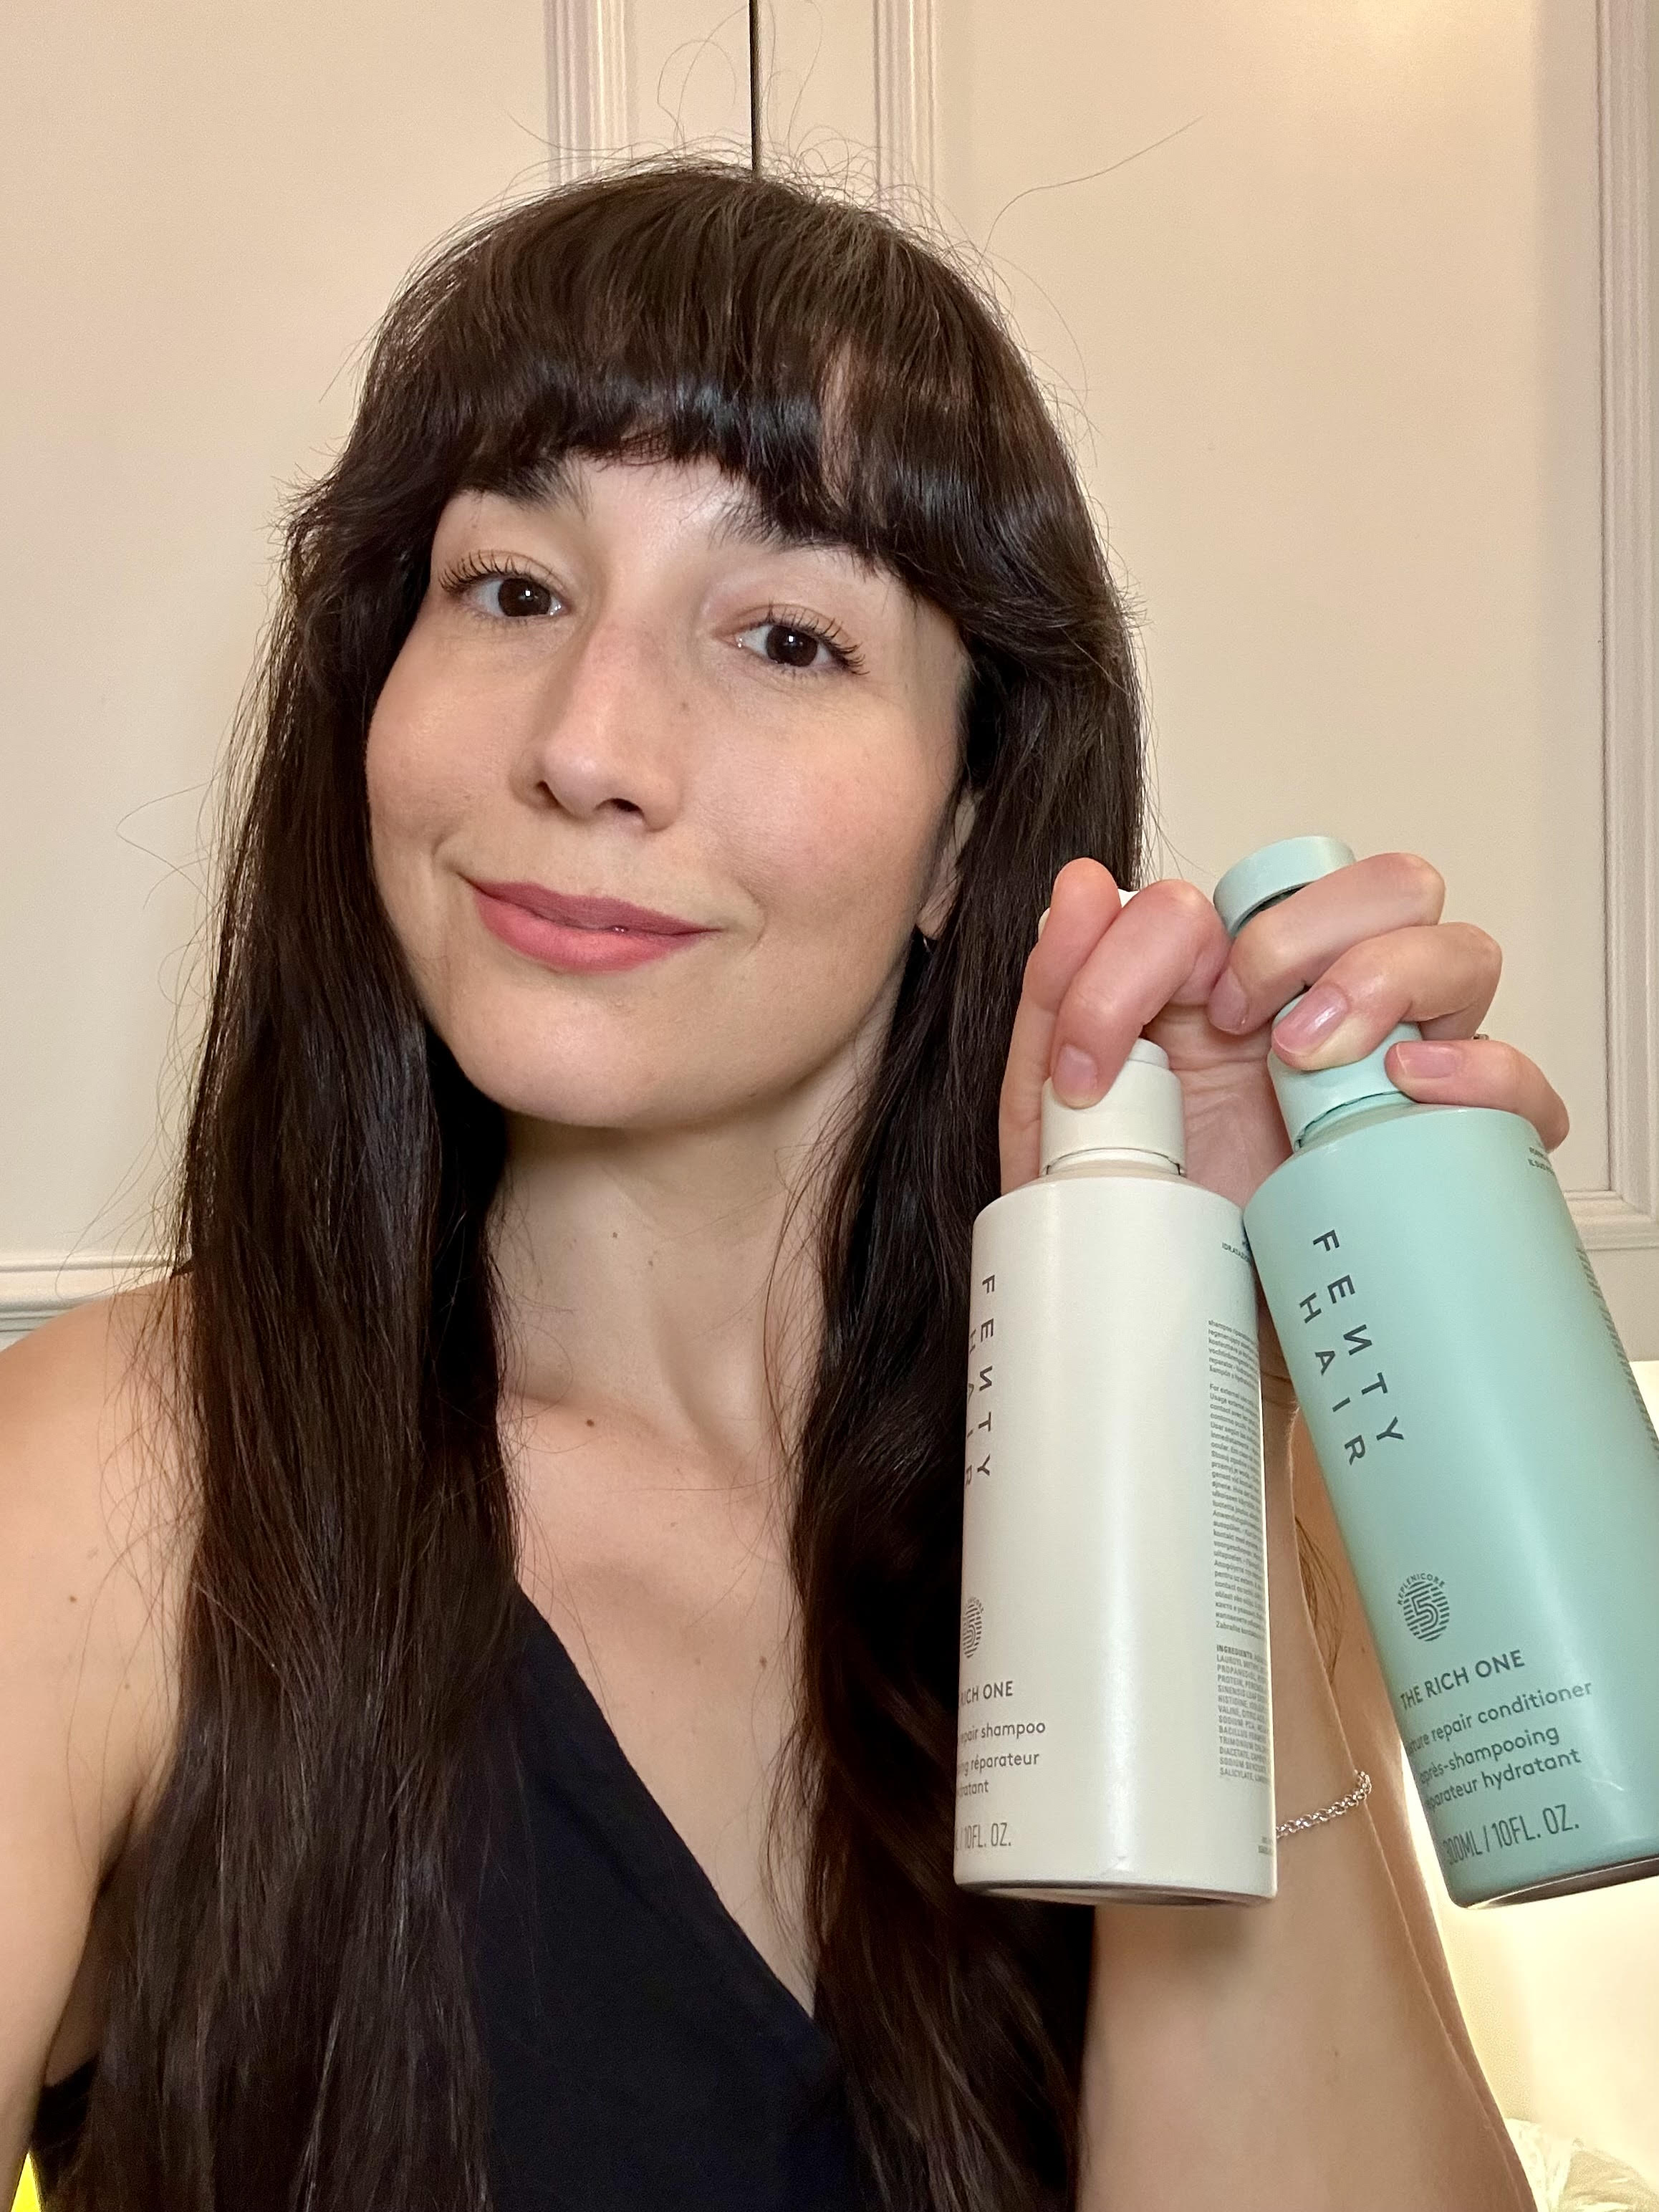 A brunette woman holding up a shampoo and conditioner